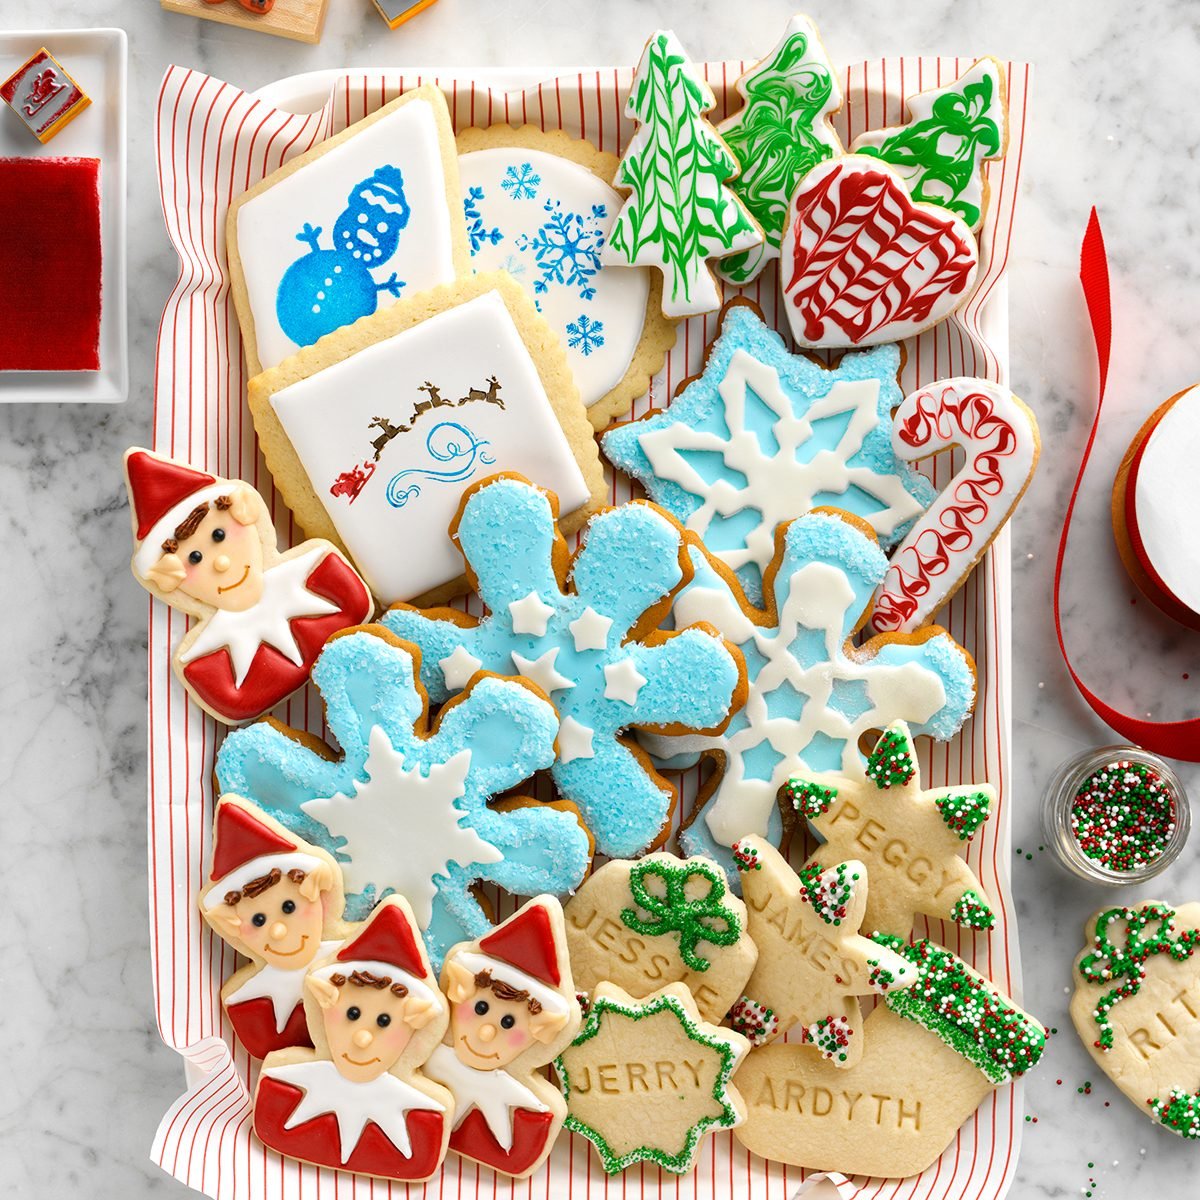 Christmas Cookie Decorating Ideas To Try This Year